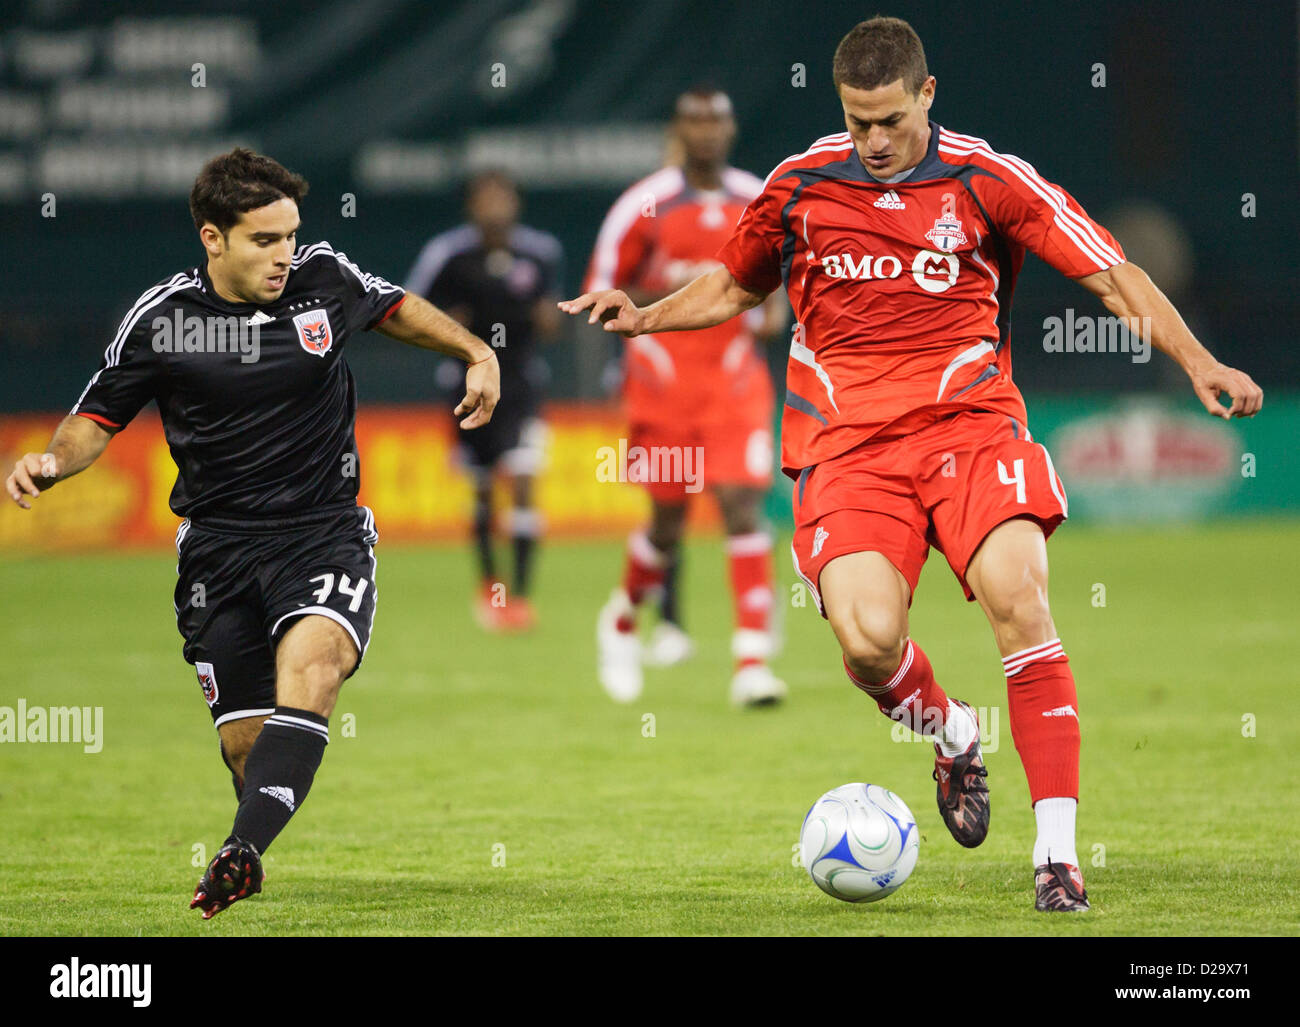 Marco Velez of Toronto FC (R) controls the ball against Franco Niell of DC United (L) during a Major League Soccer match. Stock Photo